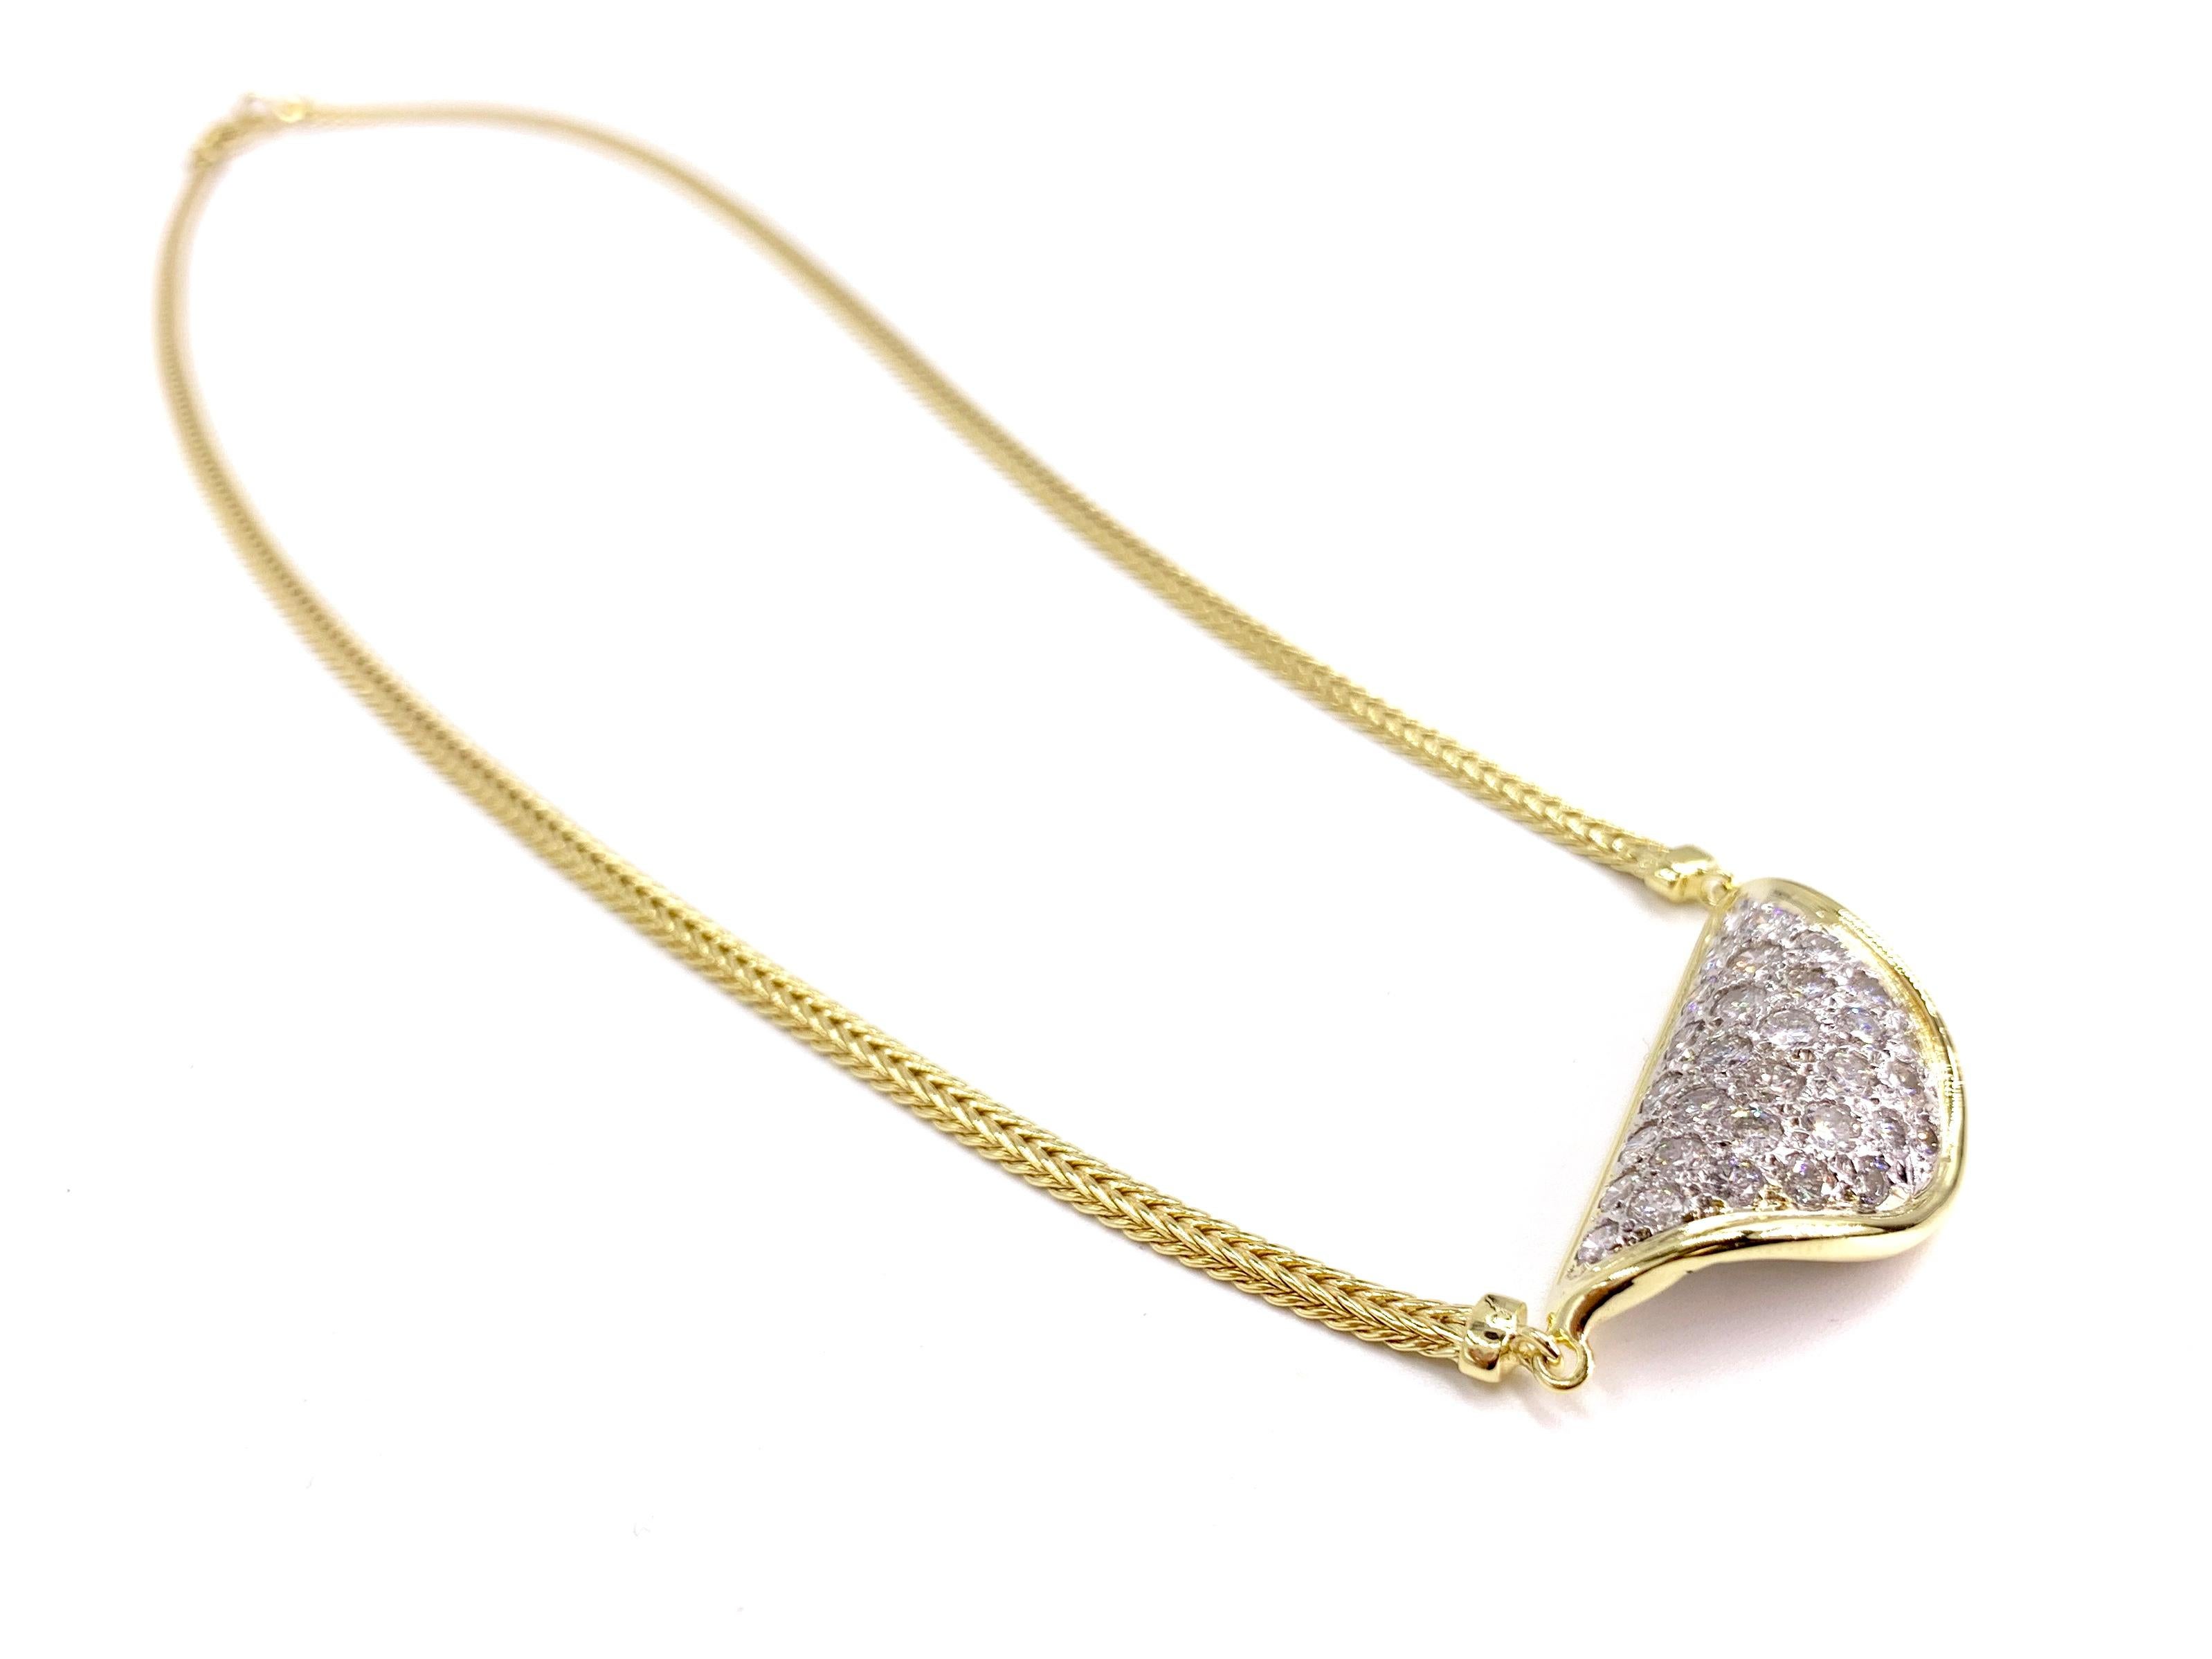 A wearable and fashionable vintage 14 karat yellow gold stationary curved diamond plate necklace featuring approximately 1.50 carats of round brilliant diamonds at approximately G color, SI1 clarity. Diamonds are expertly pave set in white gold for